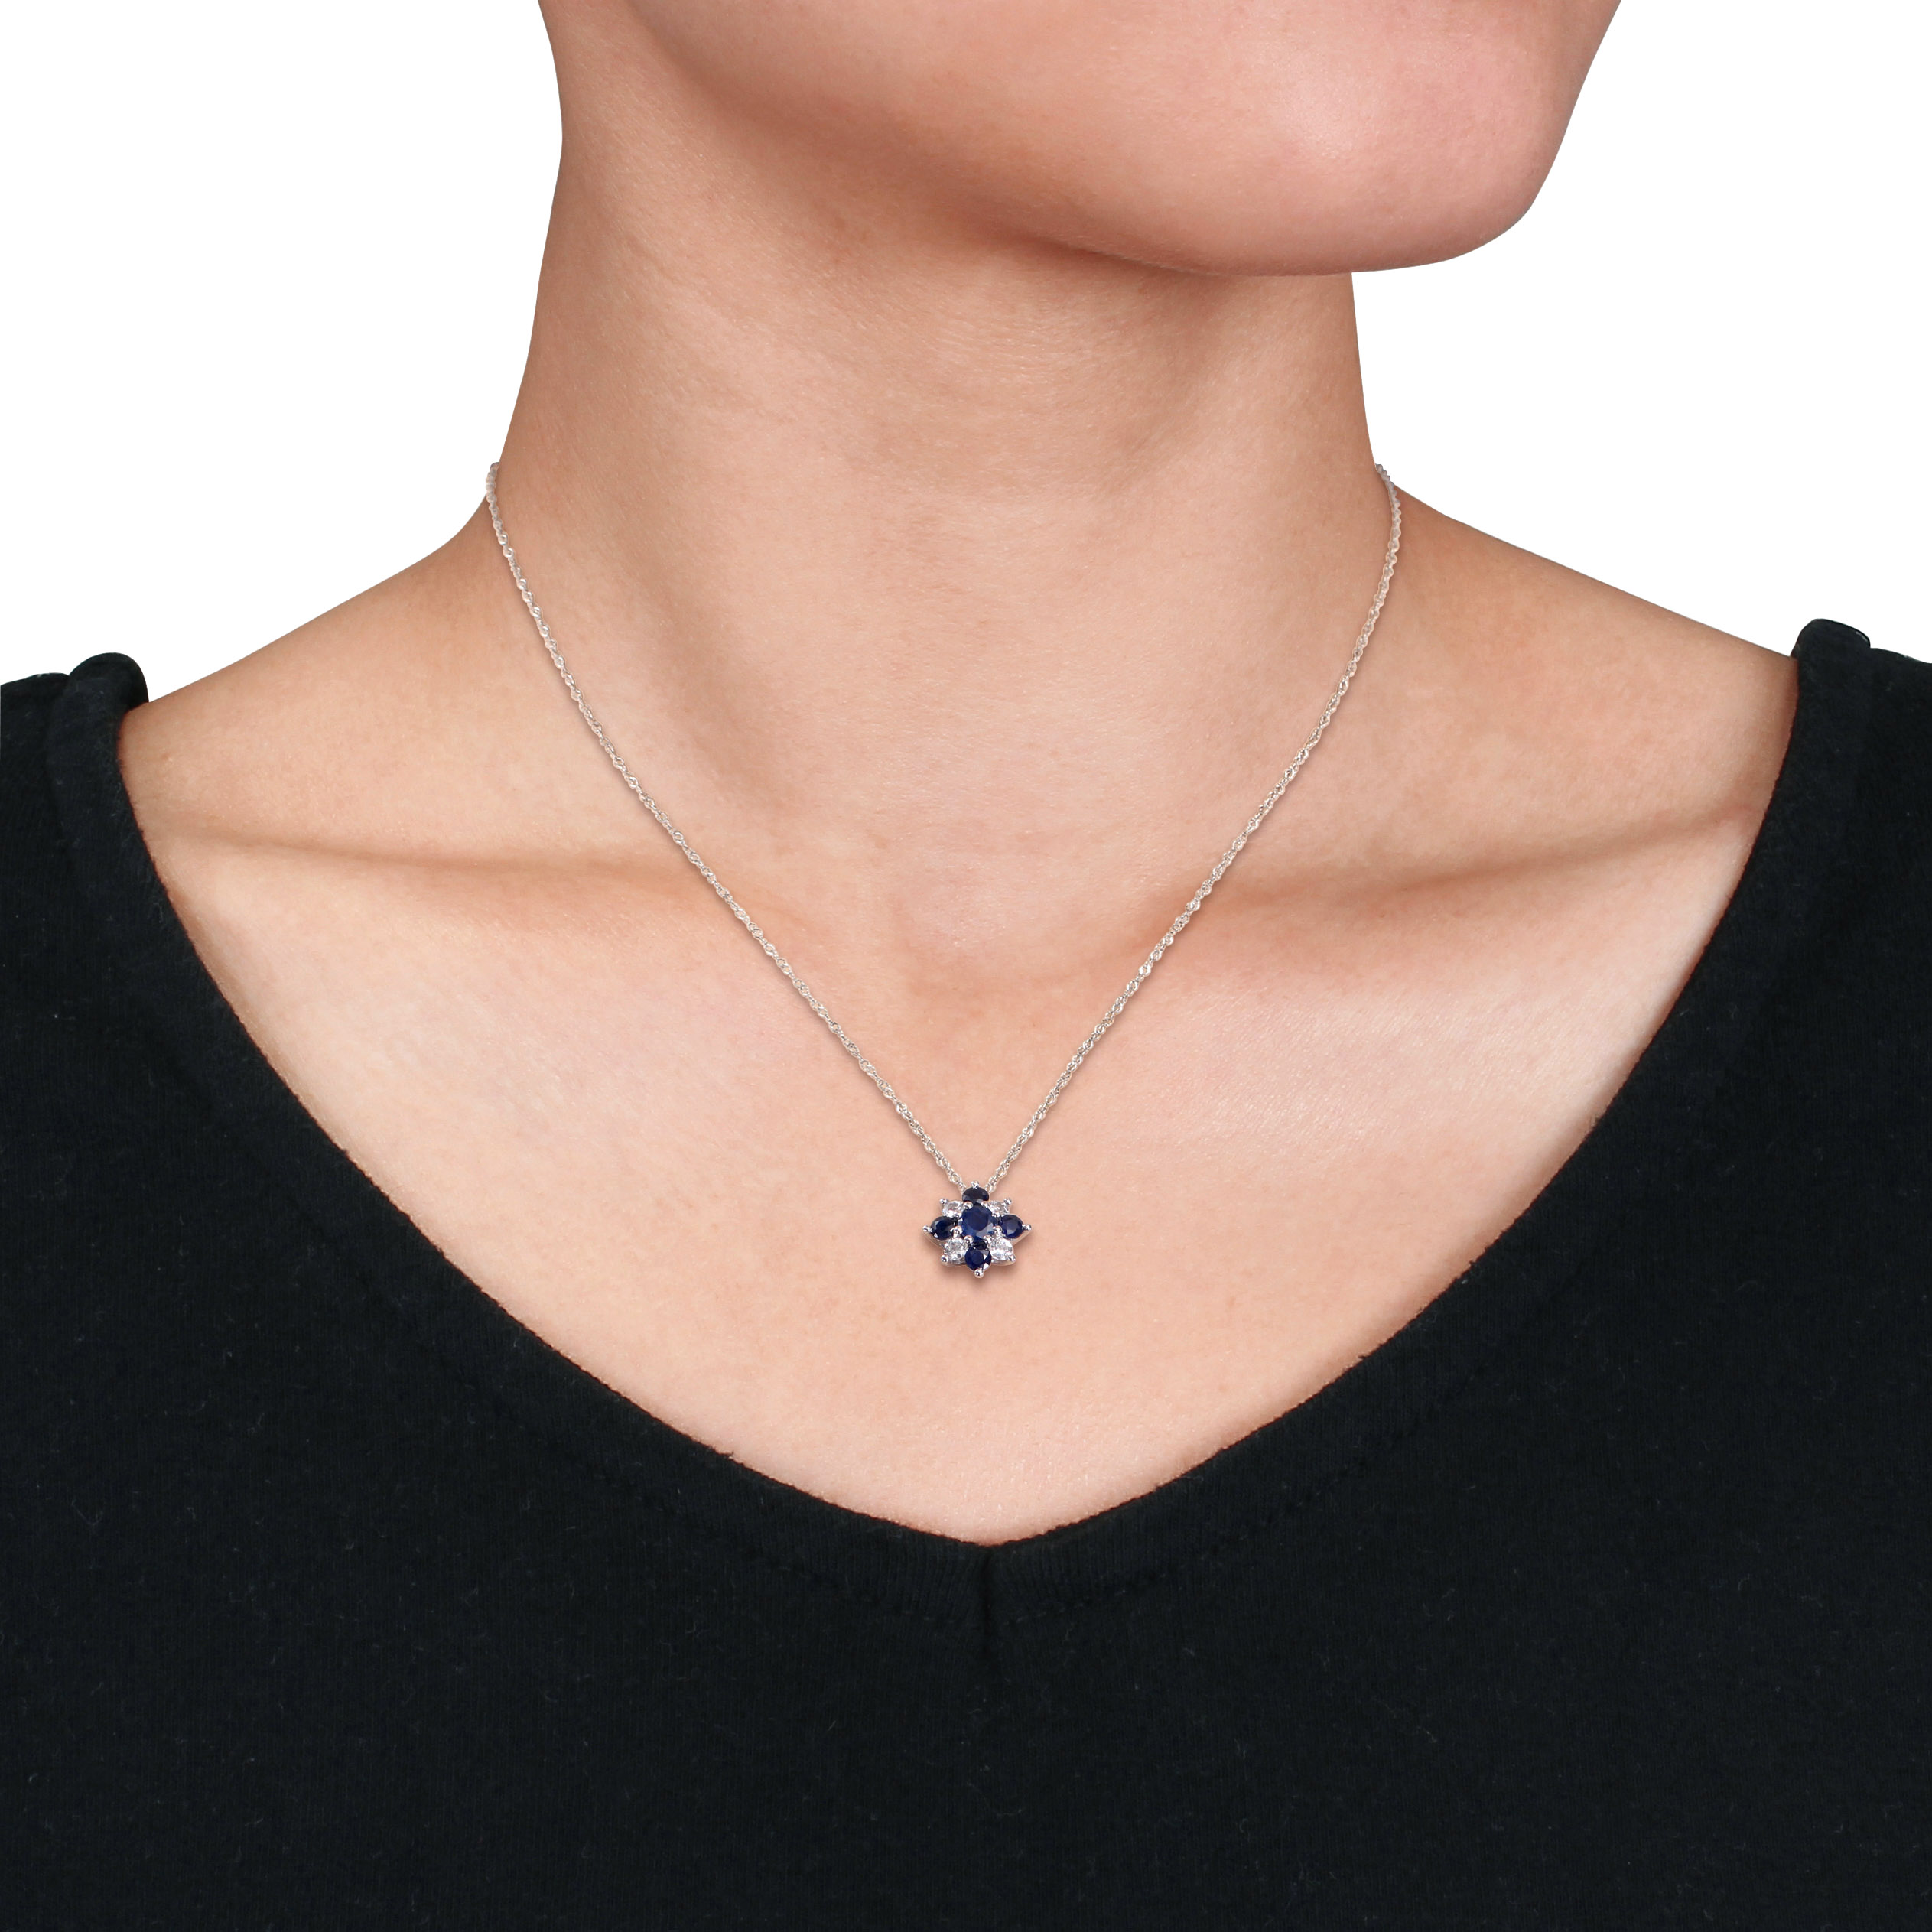 Blue and White Sapphire Flower Star Pendant with Chain in 14k White Gold